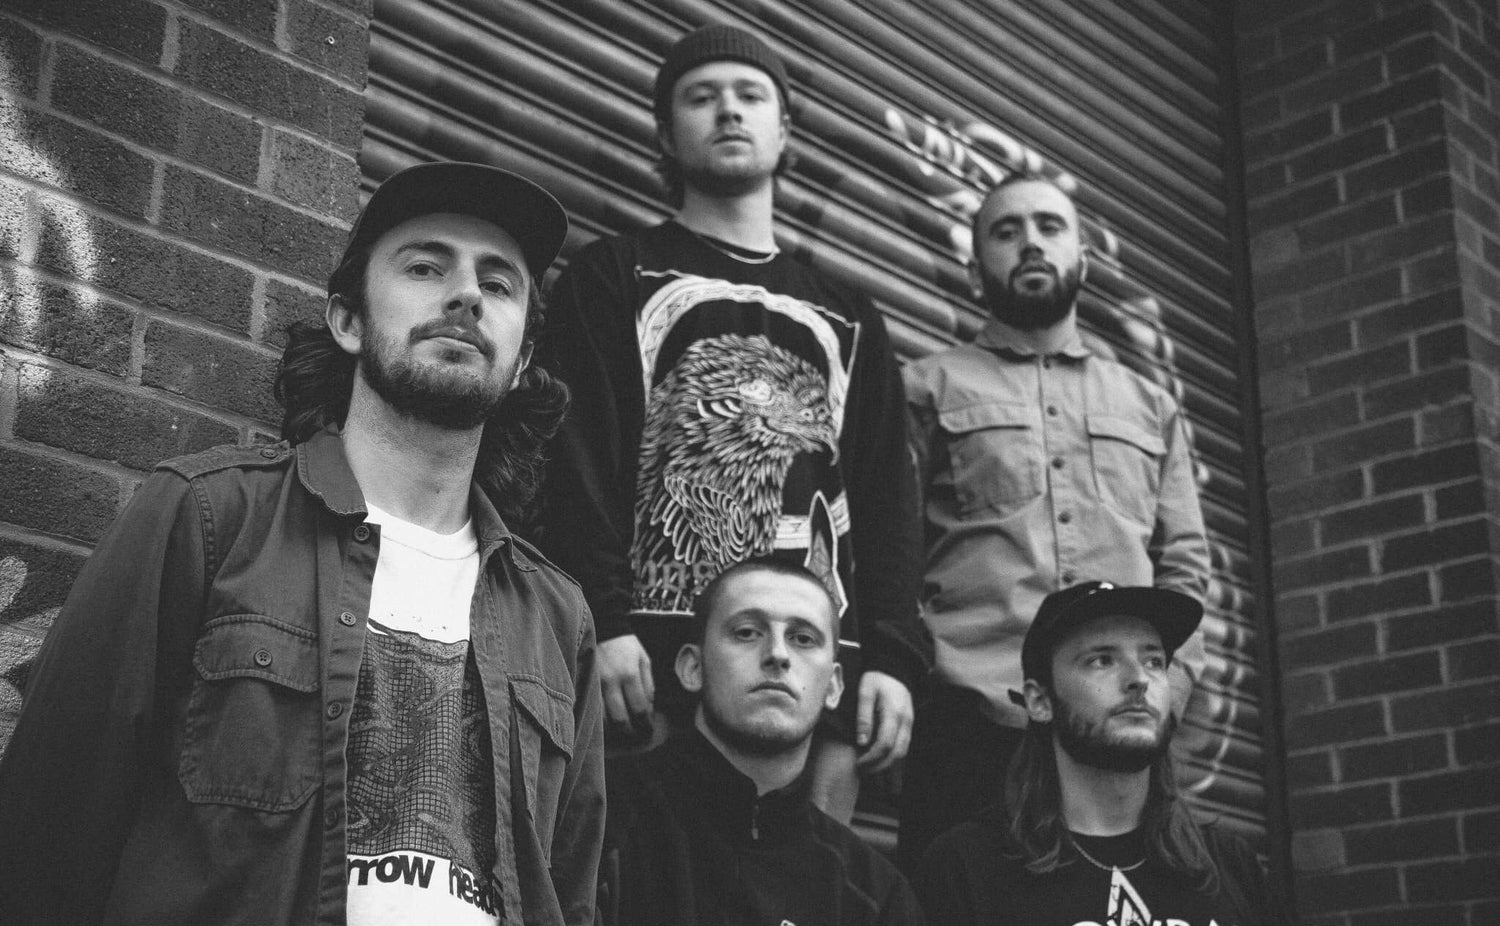 Meet the Maggots: Rough Justice are ride or die for Sheffield hardcore